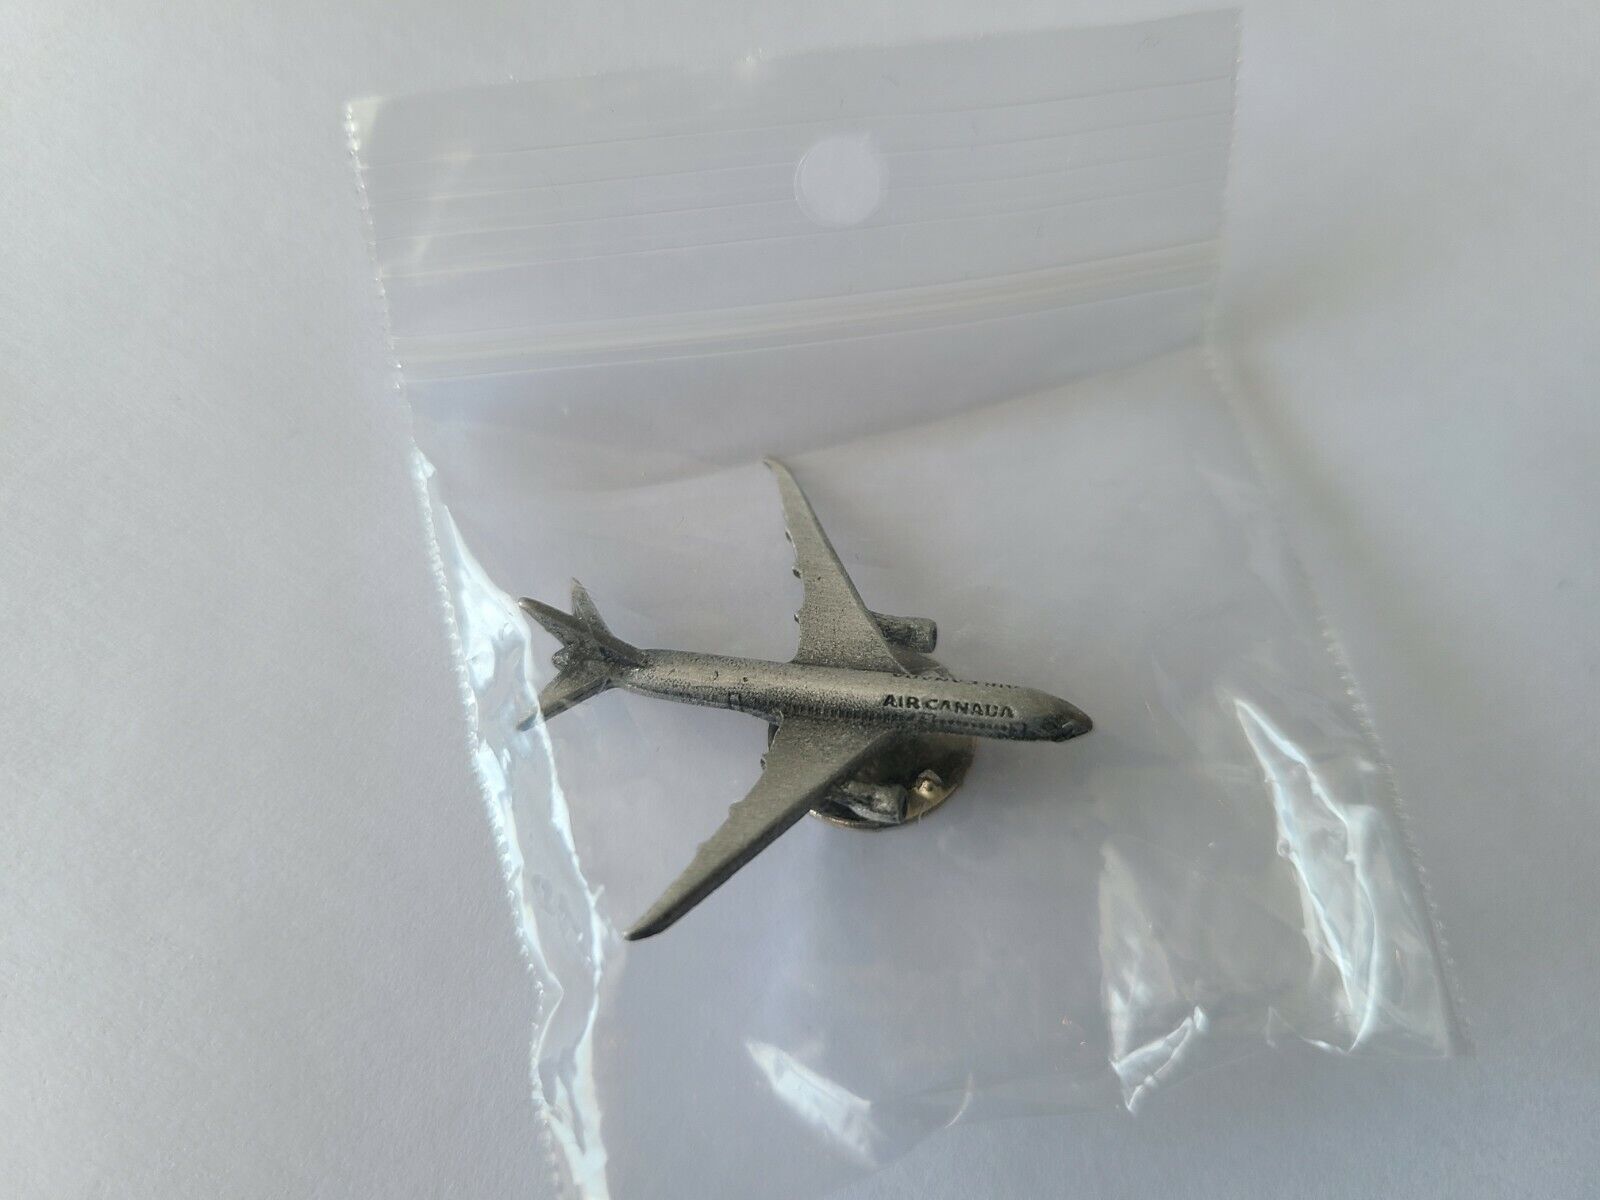  AIR CANADA - BOEING 787 PEWTER PIN. 